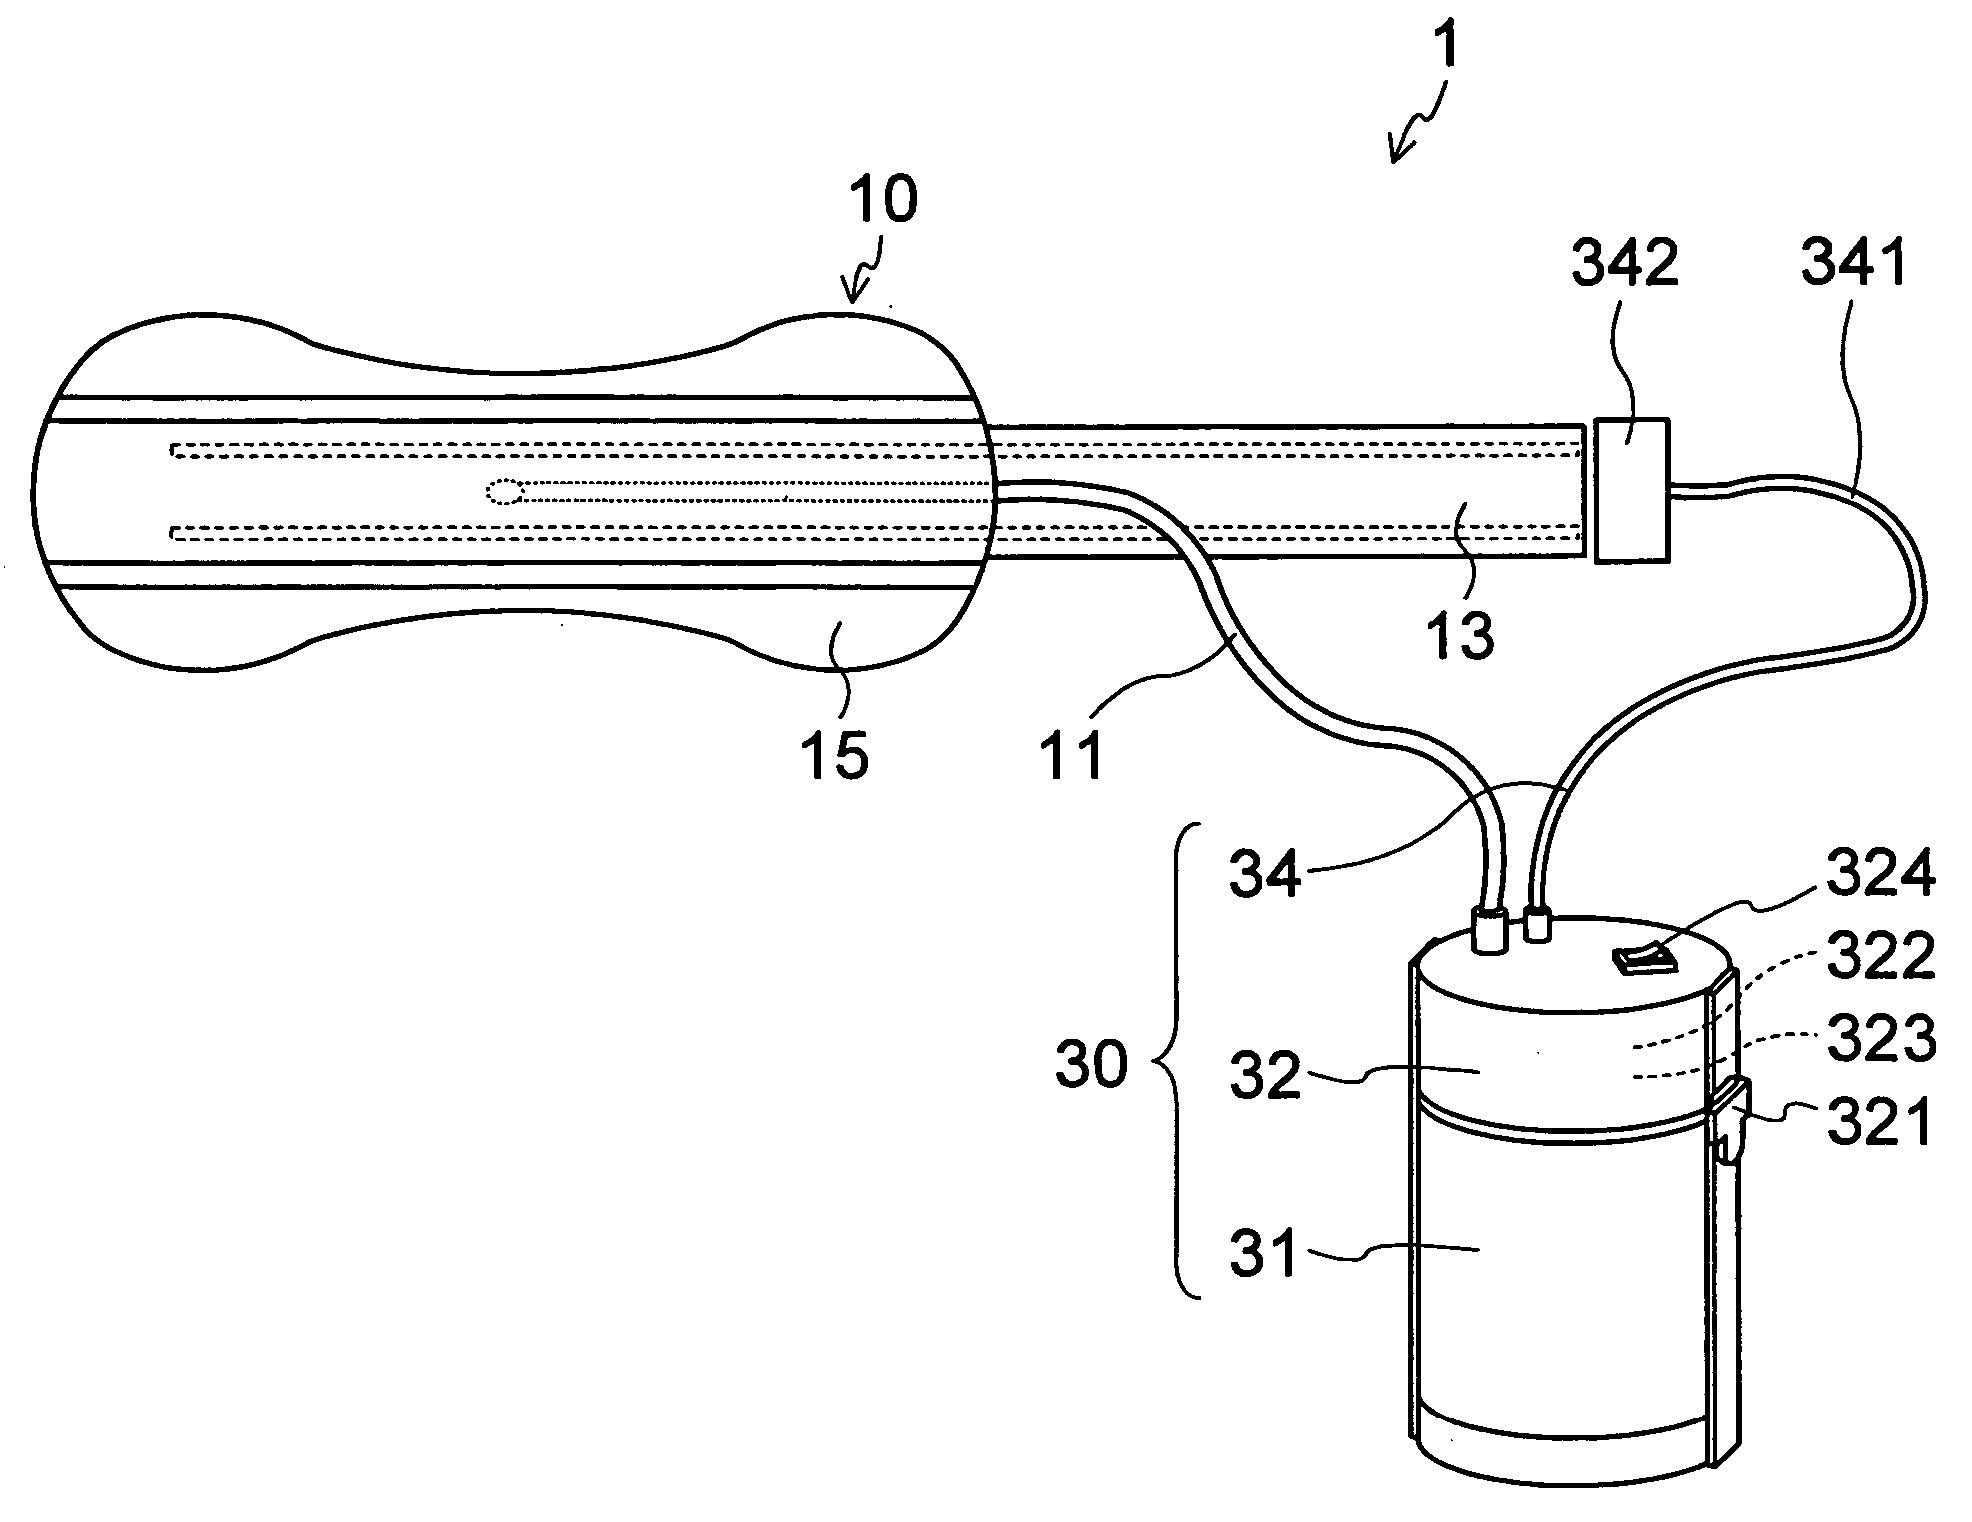 Urine receiver and urine collection processing system implementing urine receiver